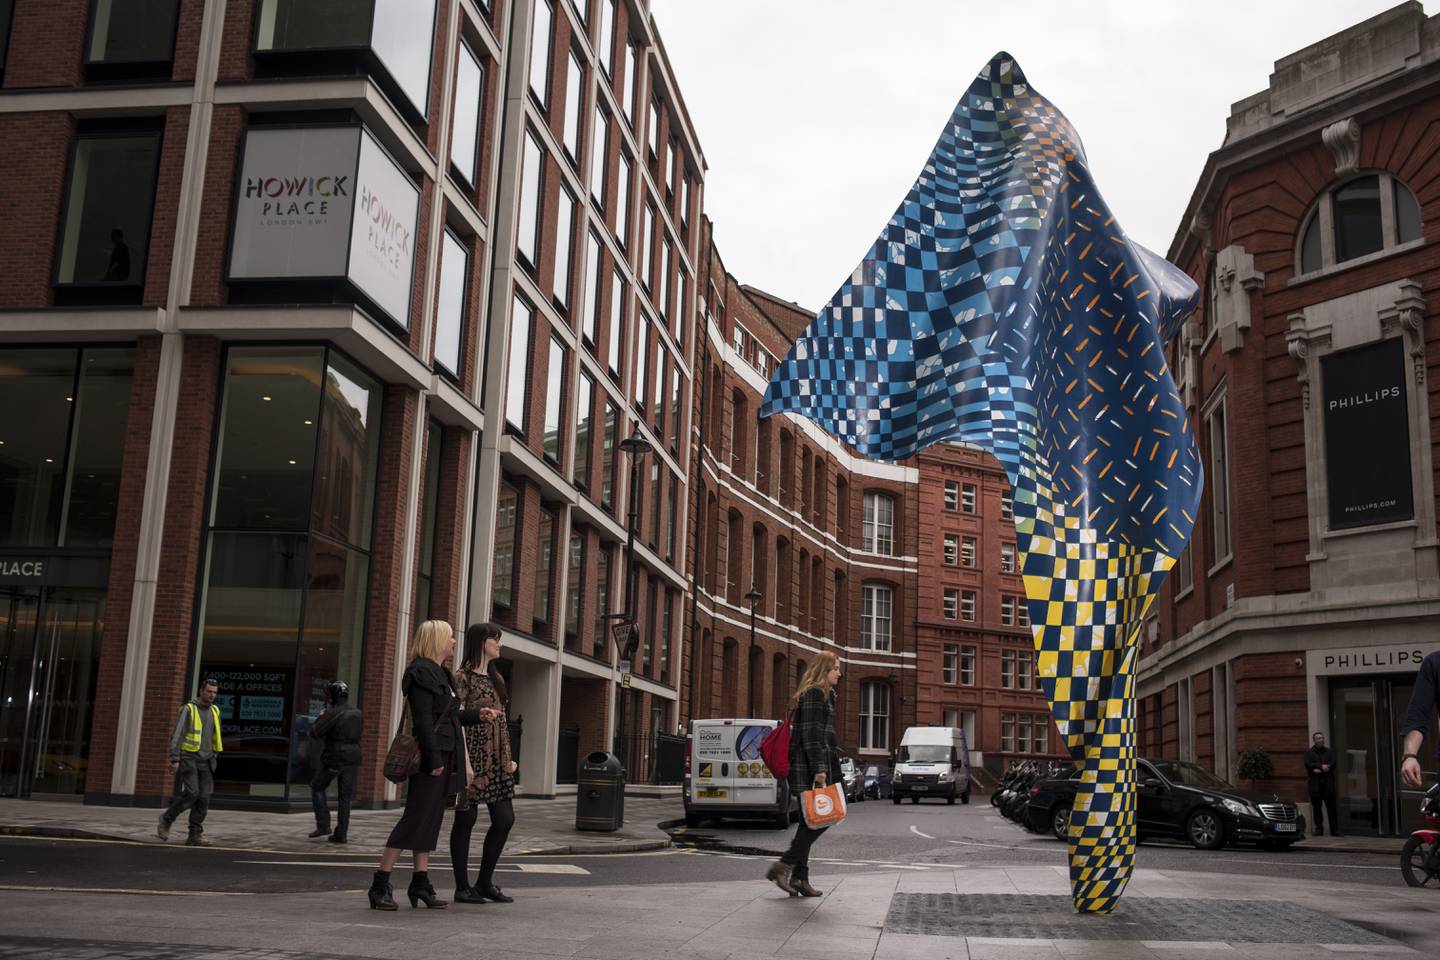 Yinka Shonibare's 'Wind Sculpture', 2014, installed in Westminster, London. Photo: Agenda Brown